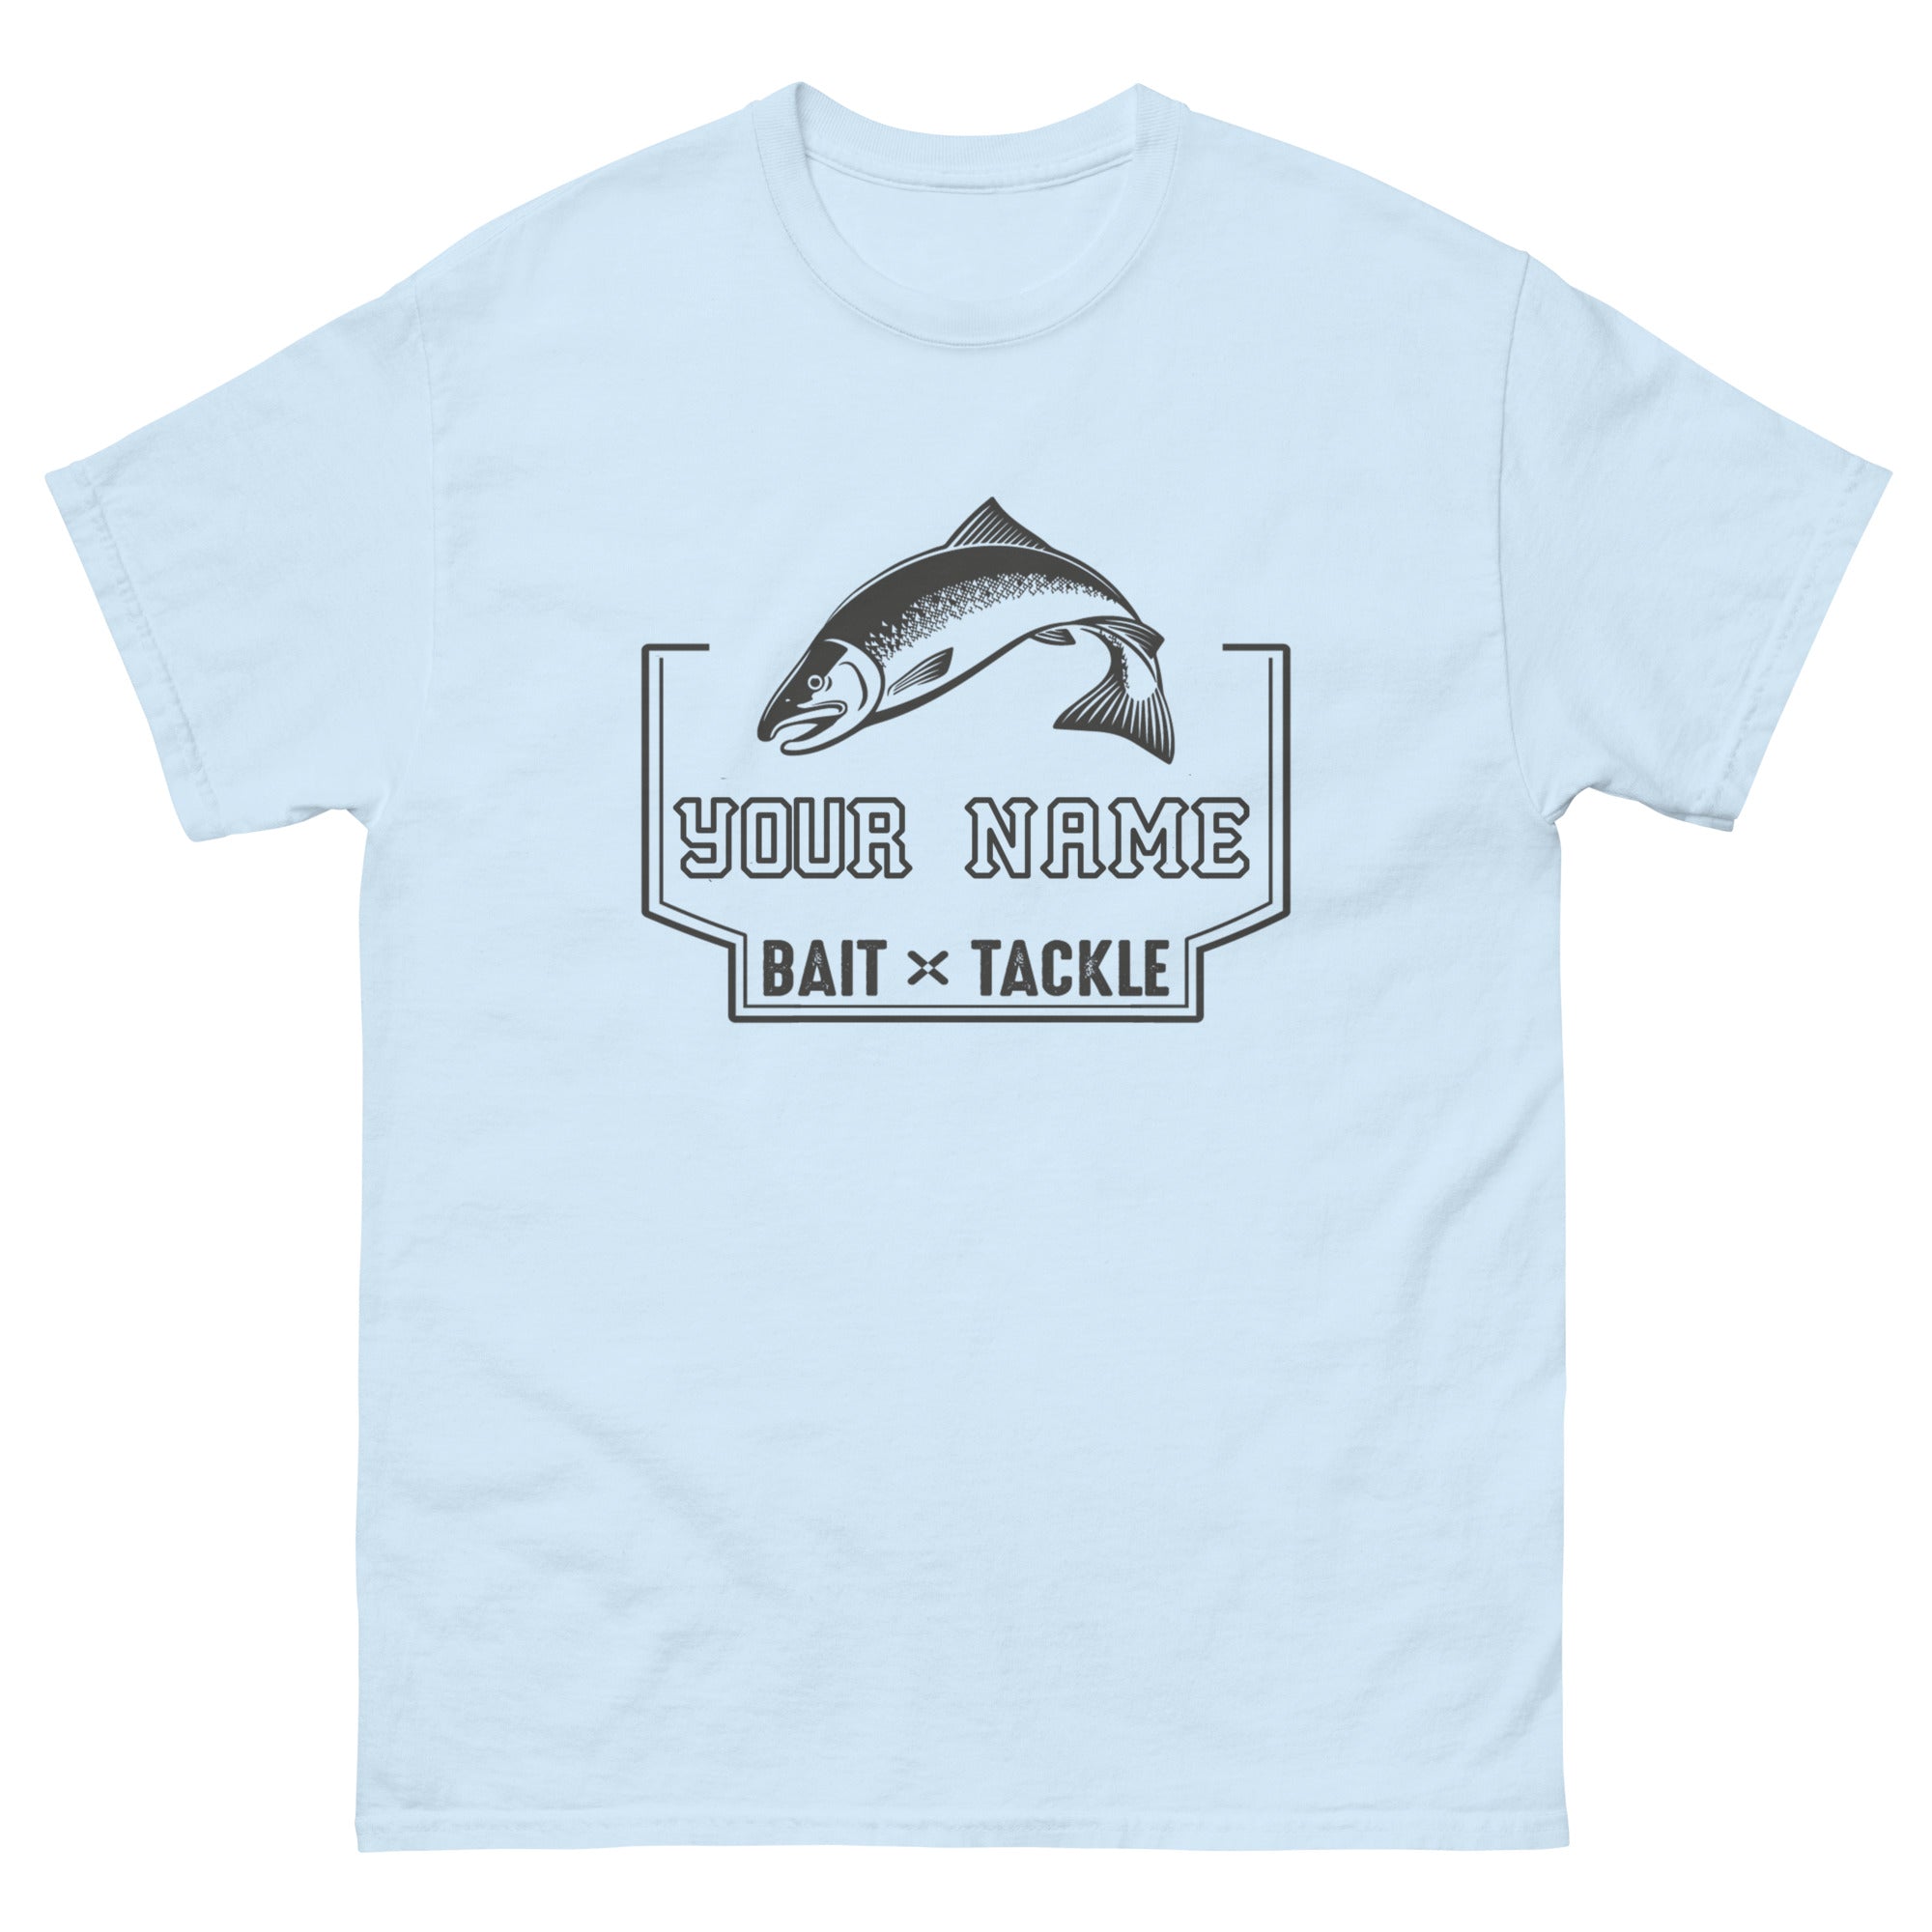 Bait and Tackle Tee 